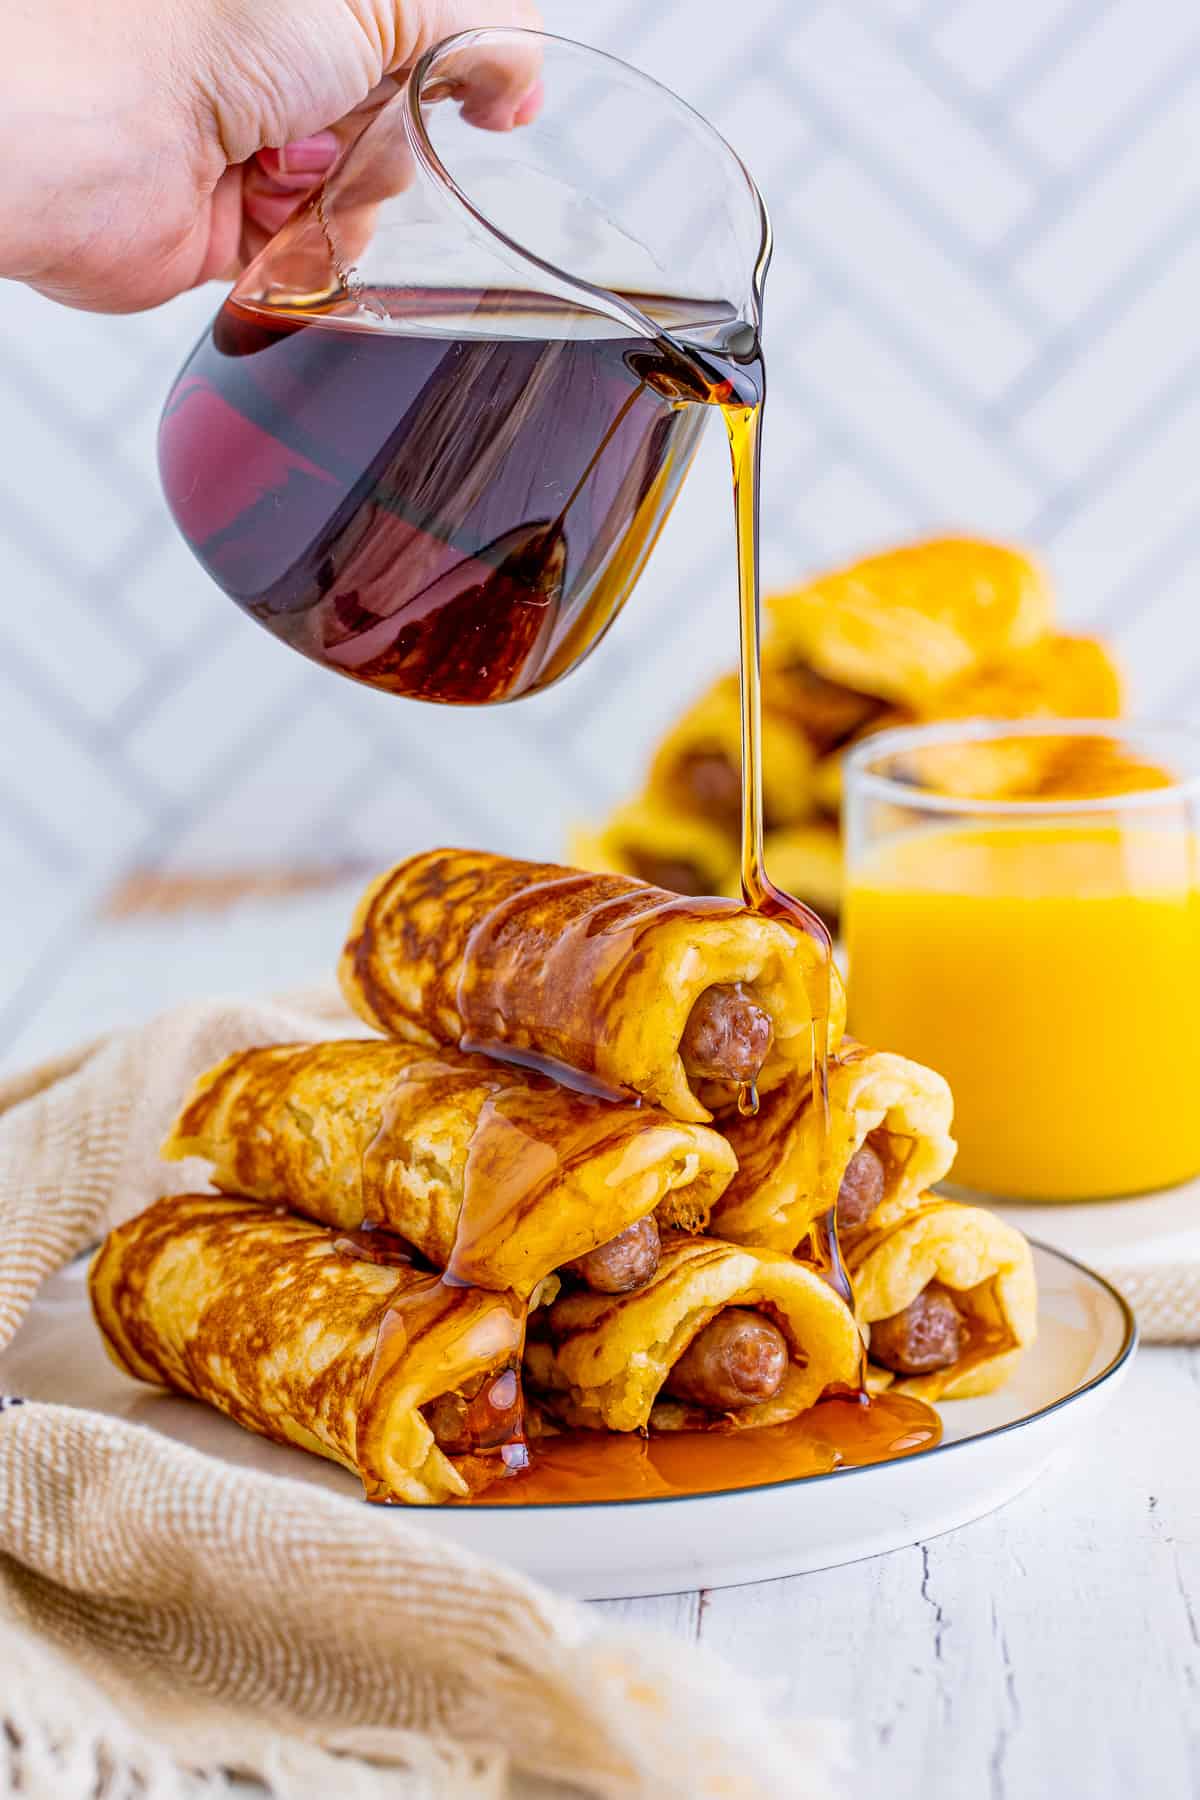 Syrup being poured over a stack of Breakfast Pigs in a Blanket on white plate.